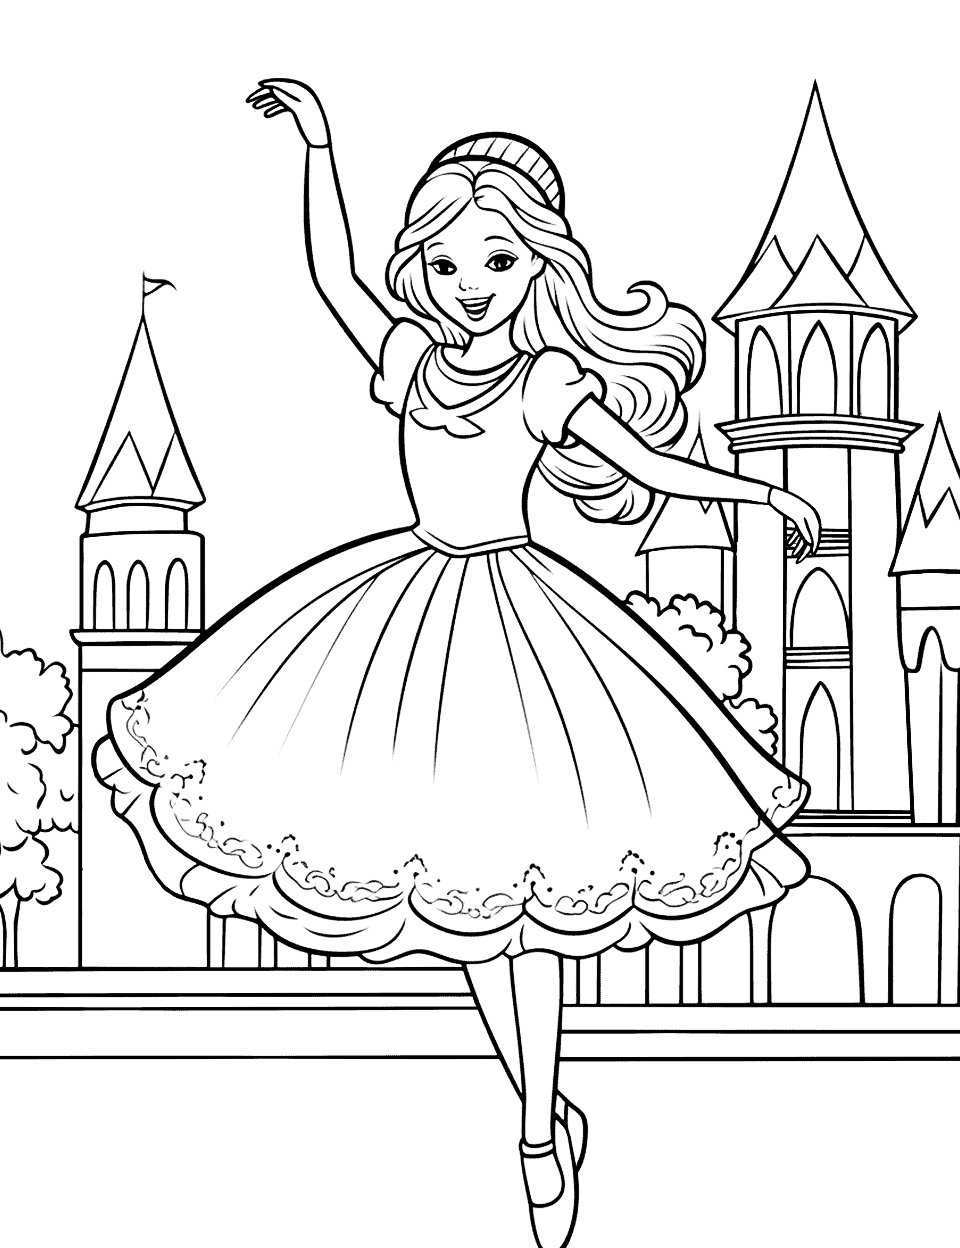 Castle Ballet Scene Ballerina Coloring Page - A ballerina with short hair, dancing in front of royal towers.